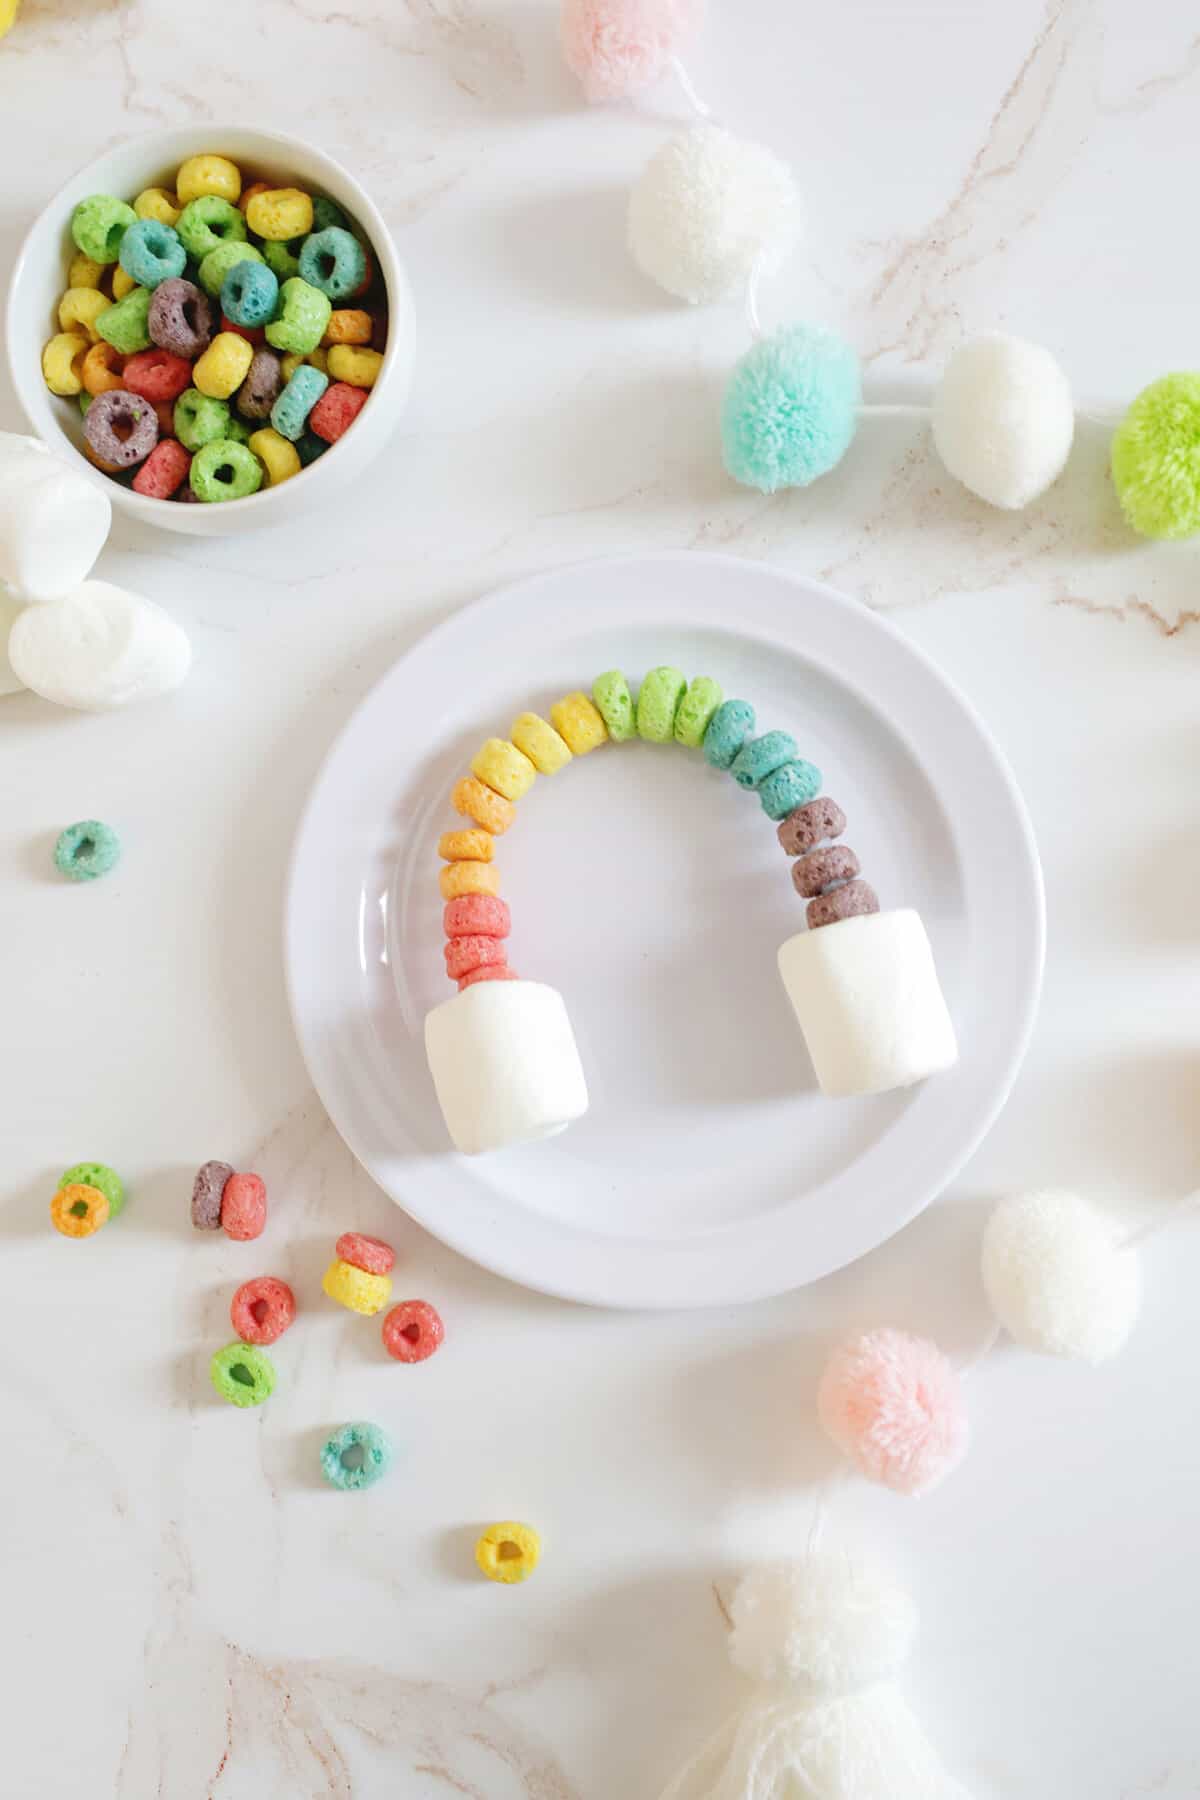 fruit loops rainbow with marshmallow cloud